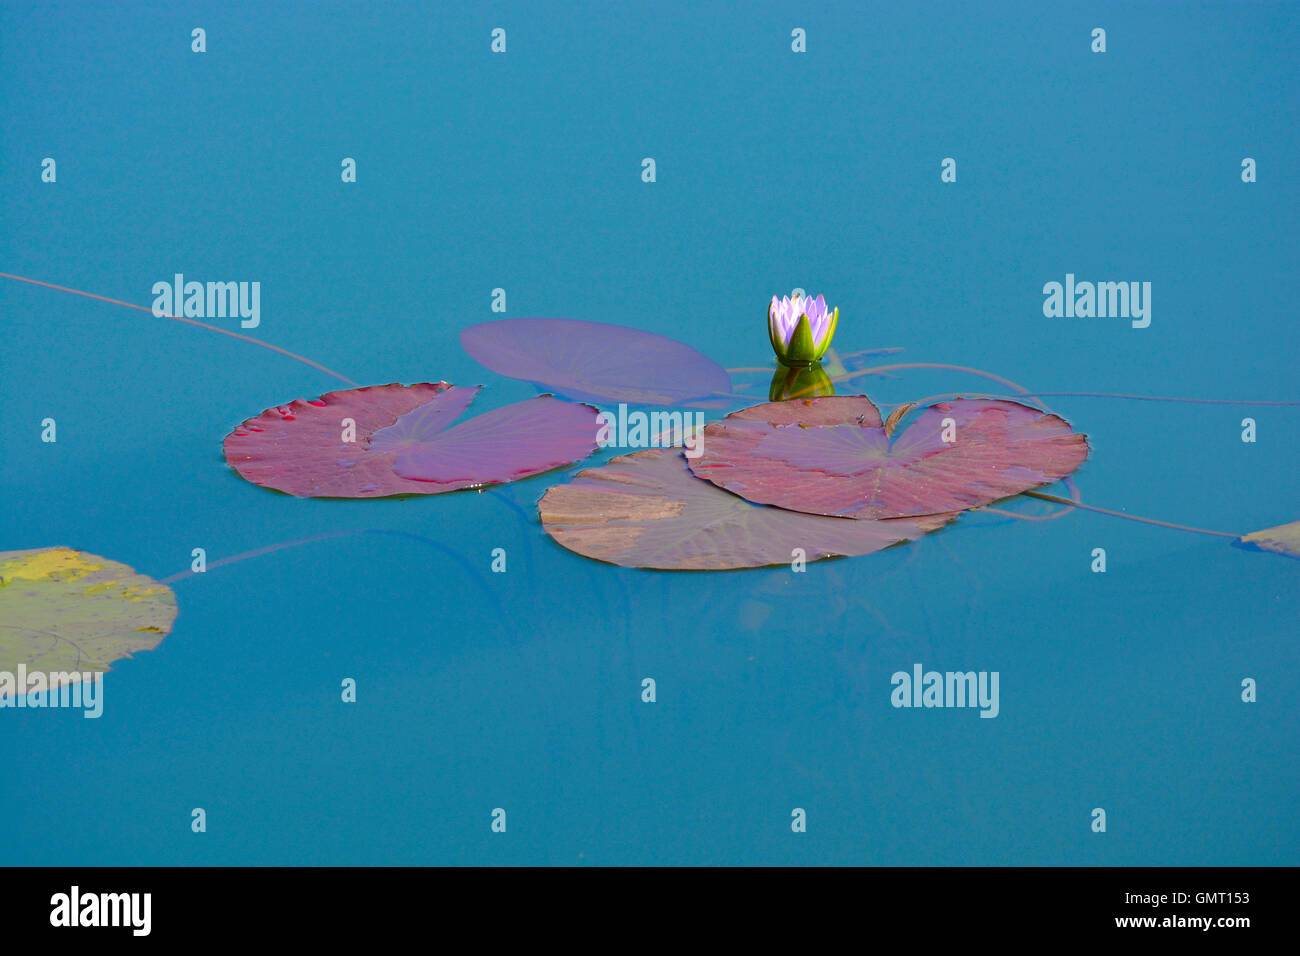 Single water lily with leaves in a tranquil water scene Stock Photo